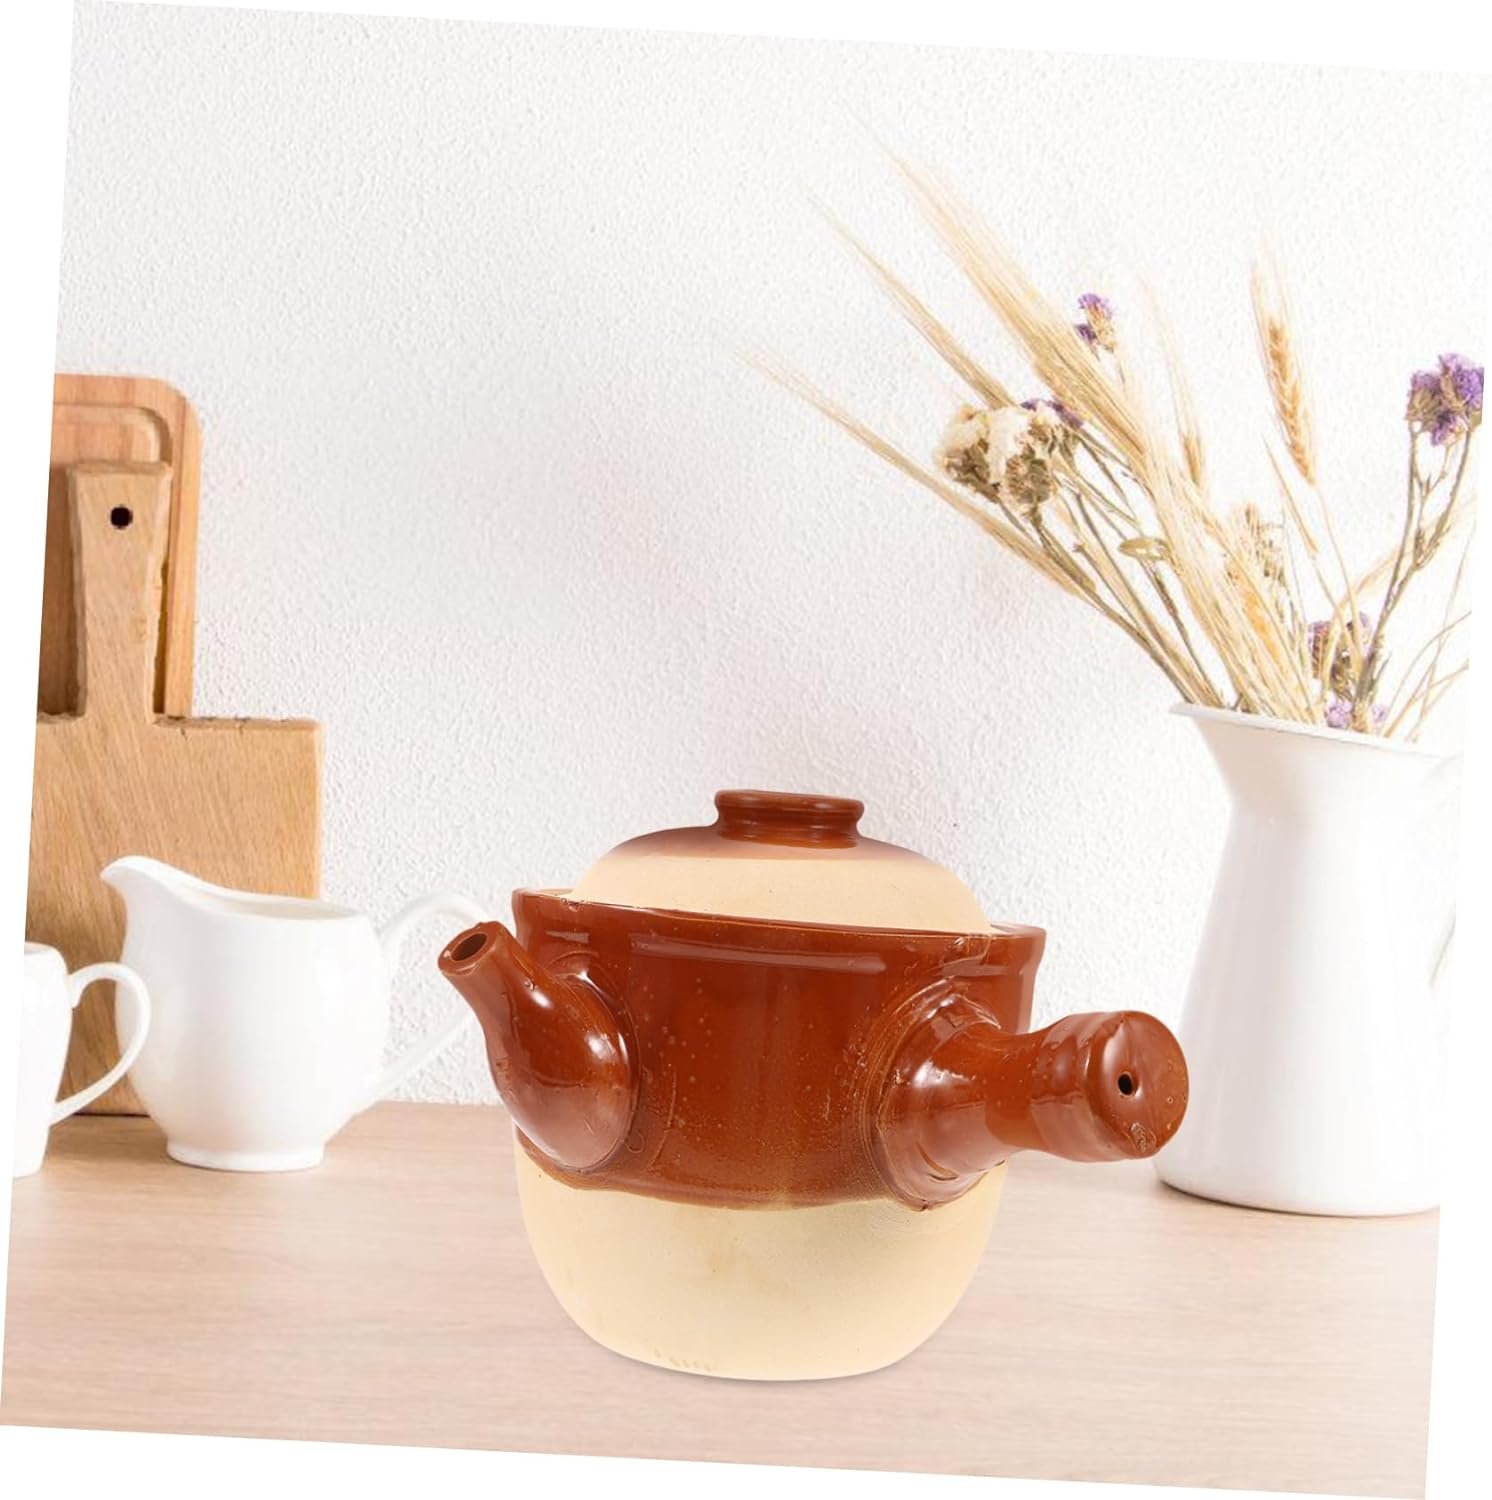 FELTECHELECTR Traditional Chinese Medicine Pot Ceramic Oven Pot Medicine Cooker Pot Ceramic Griddle Ceramic Cooking Pot Ceramic Pot Peony Saucepan with Lid Home Supply Clay Korean South Korea